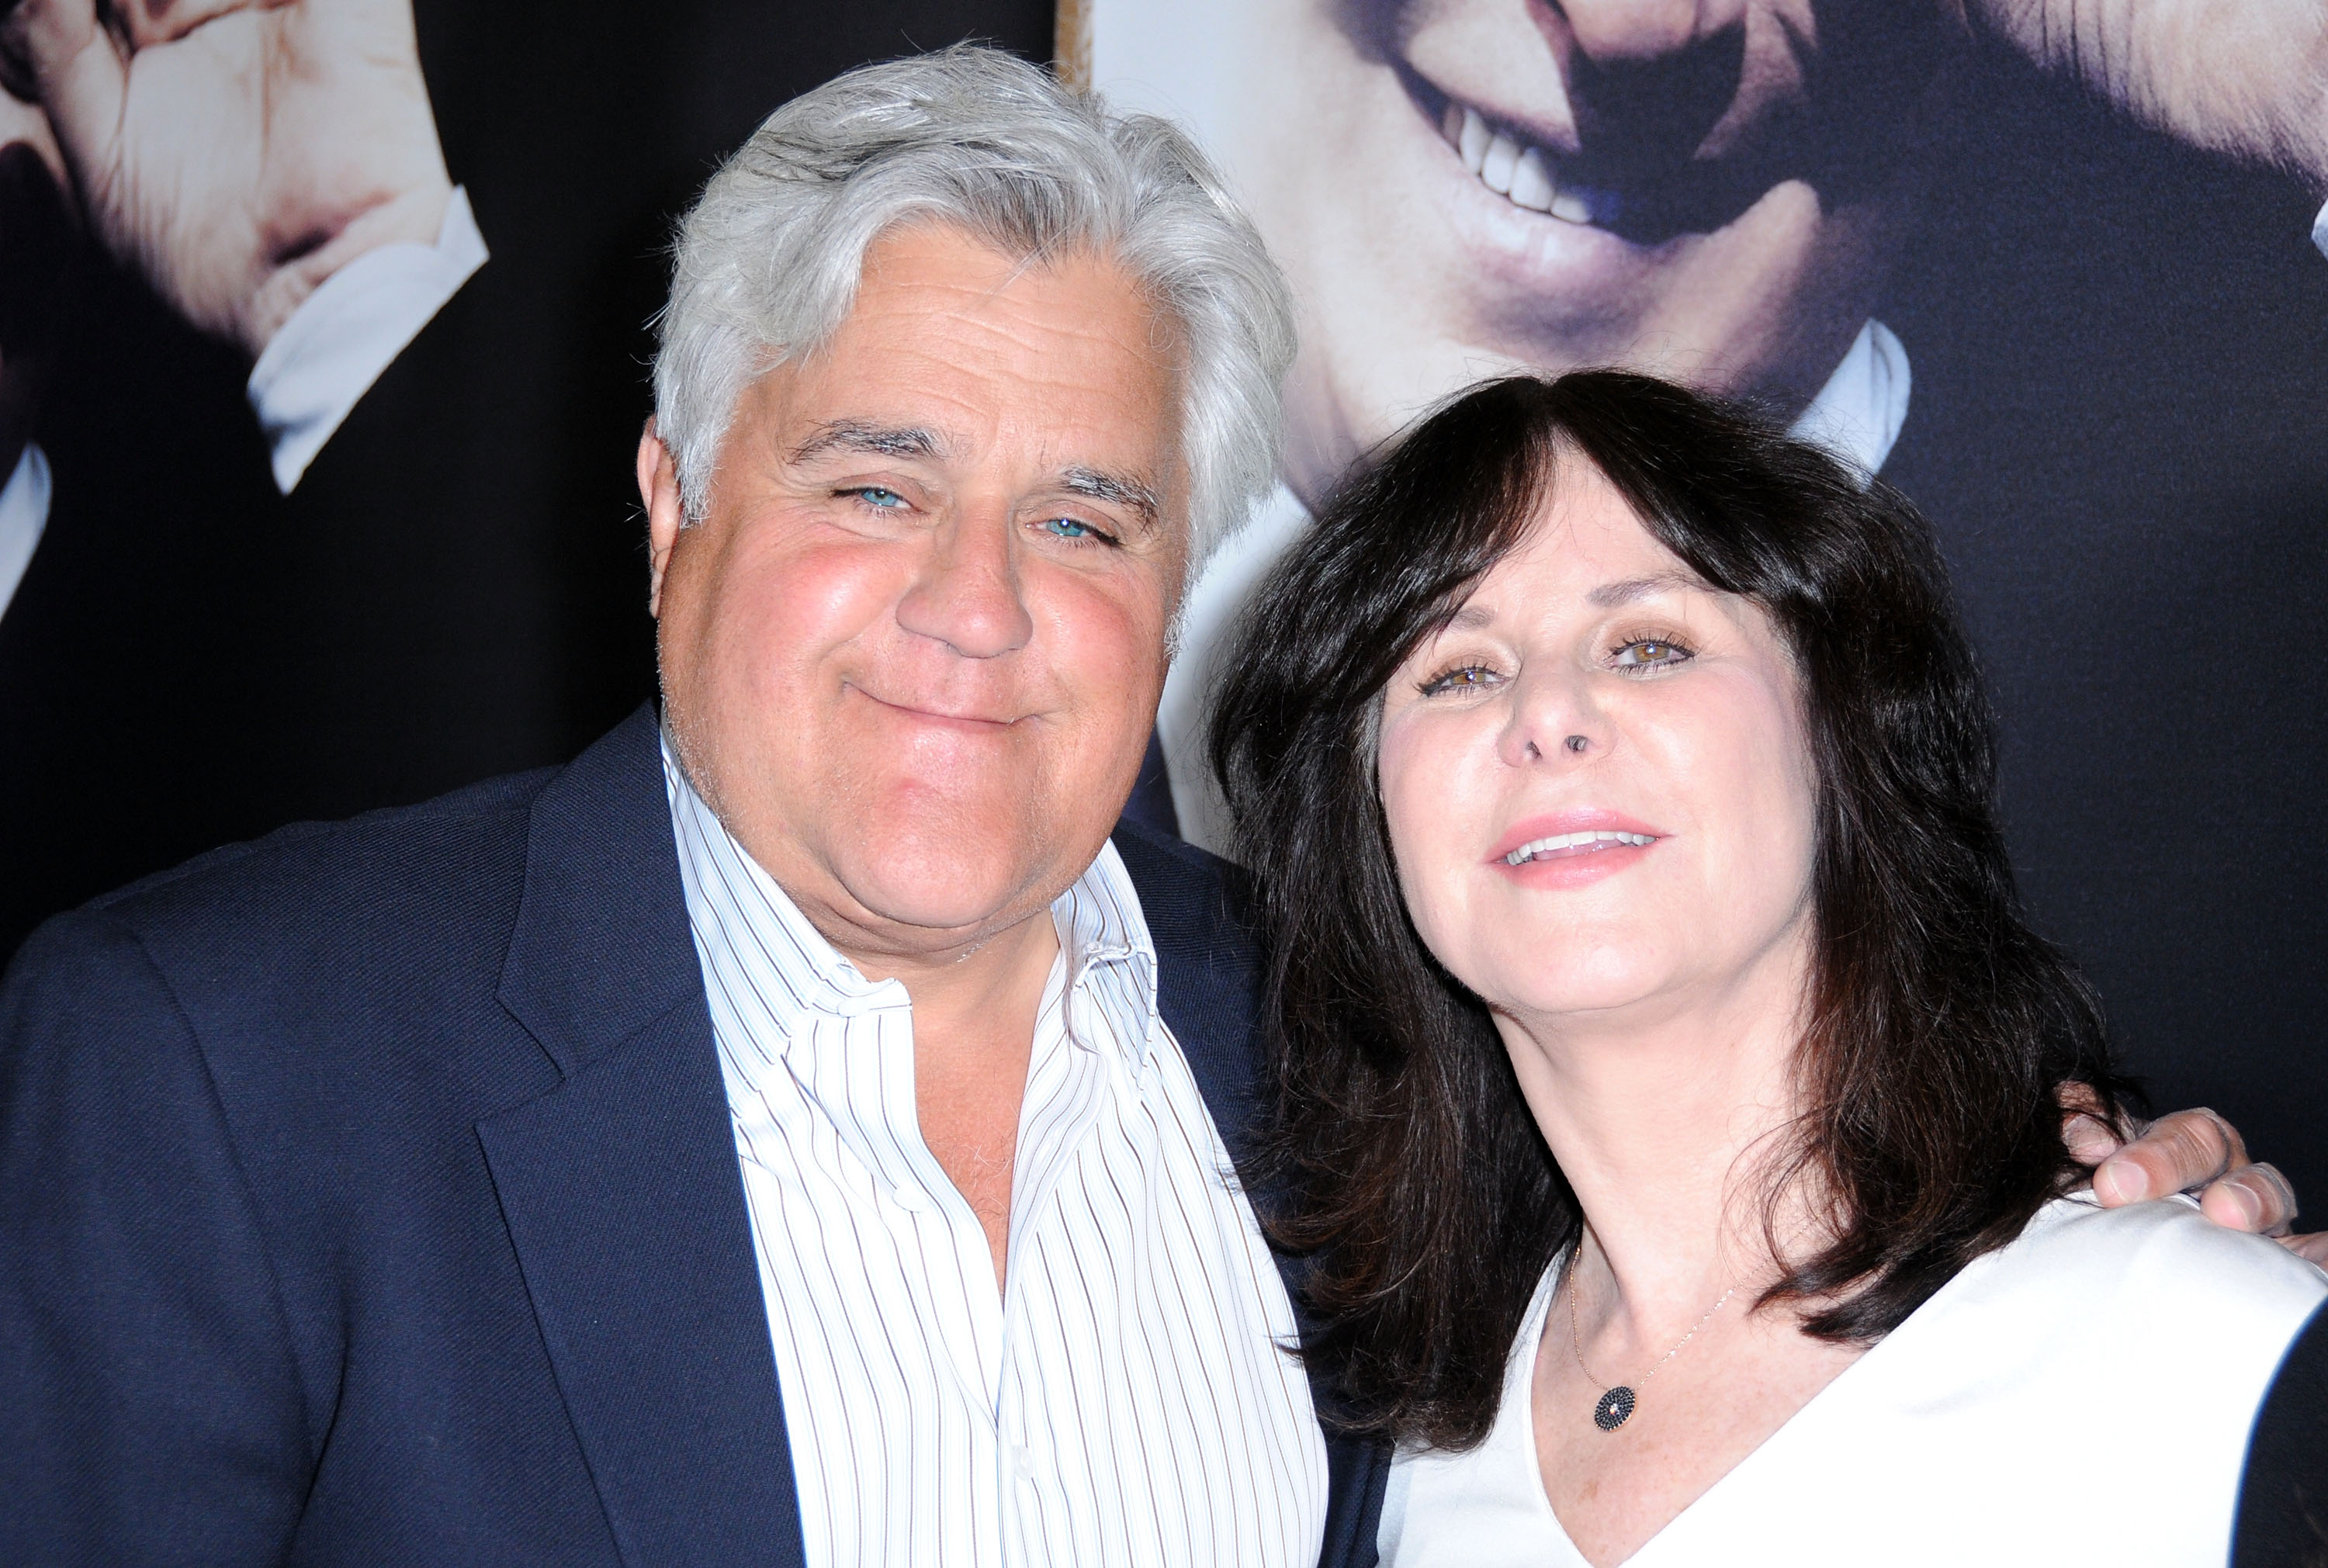 Jay Leno and Mavis Leno attend an HBO premiere of an exclusive presentation of "Billy Crystal 700 Sundays" on April 17, 2014, at Ray Kurtzman Theater in Los Angeles, California. | Source: Getty Images